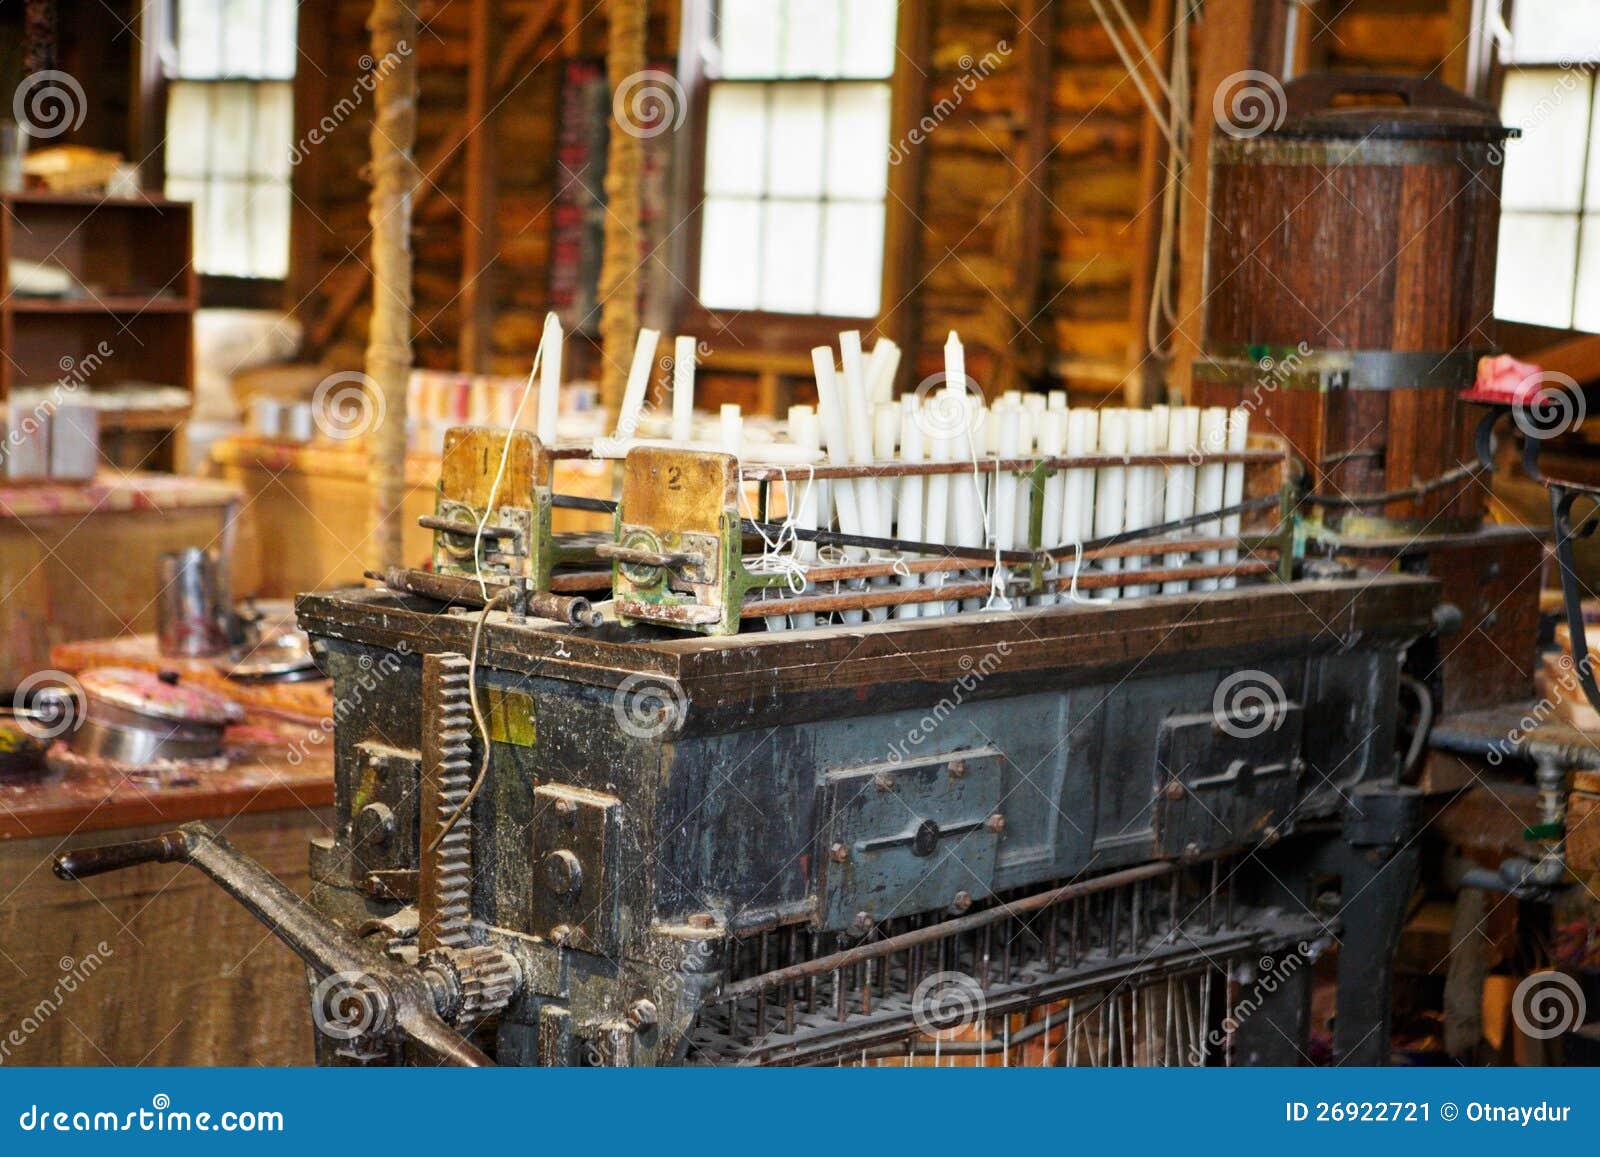 Candle factory stock image. Image of parafin, utensils - 26922721